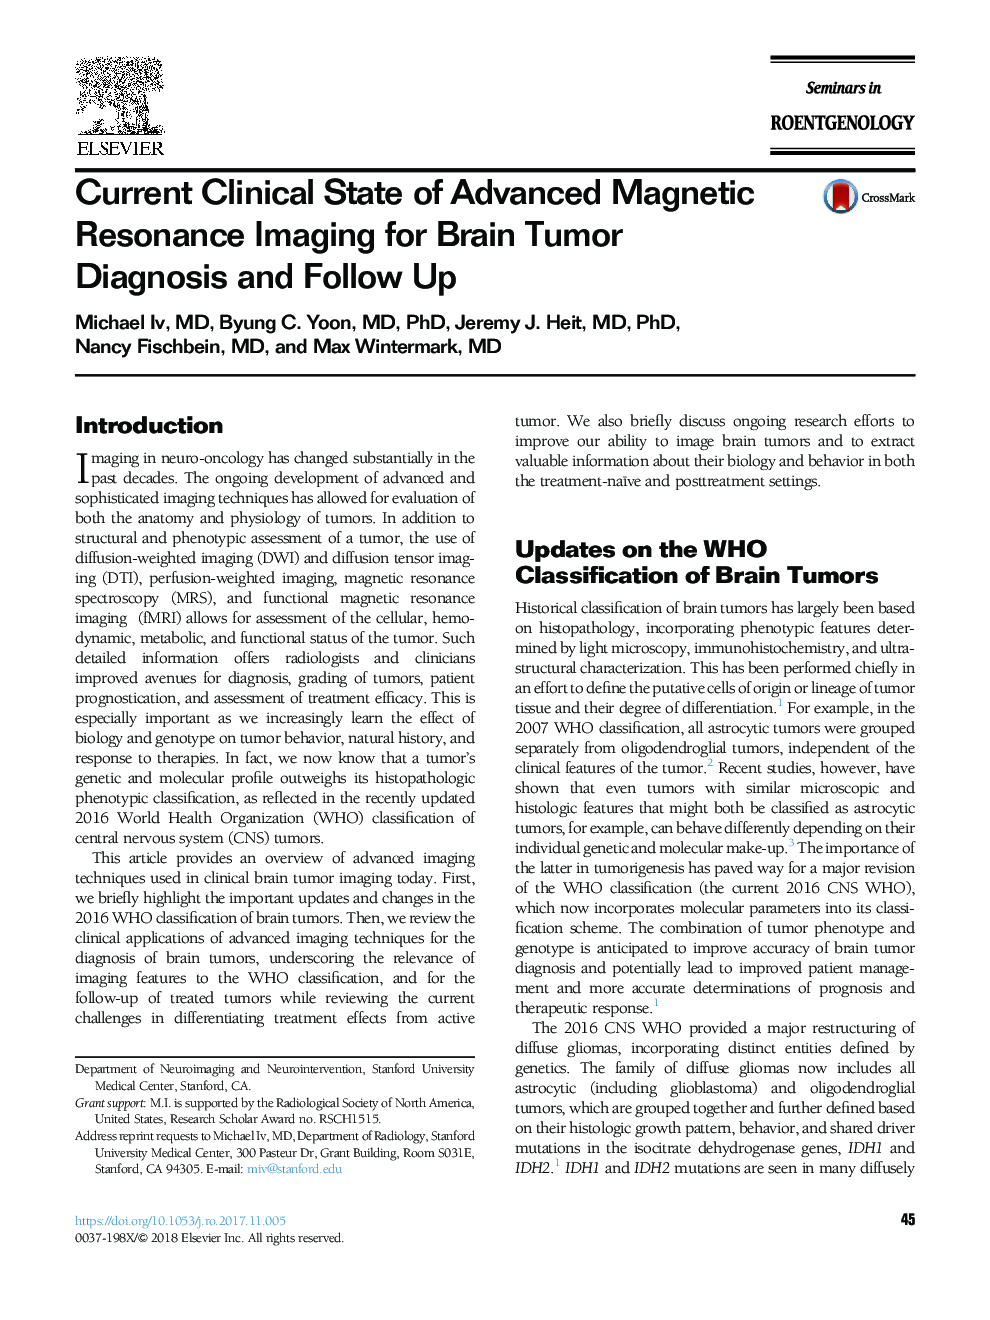 Current Clinical State of Advanced Magnetic Resonance Imaging for Brain Tumor Diagnosis and Follow Up